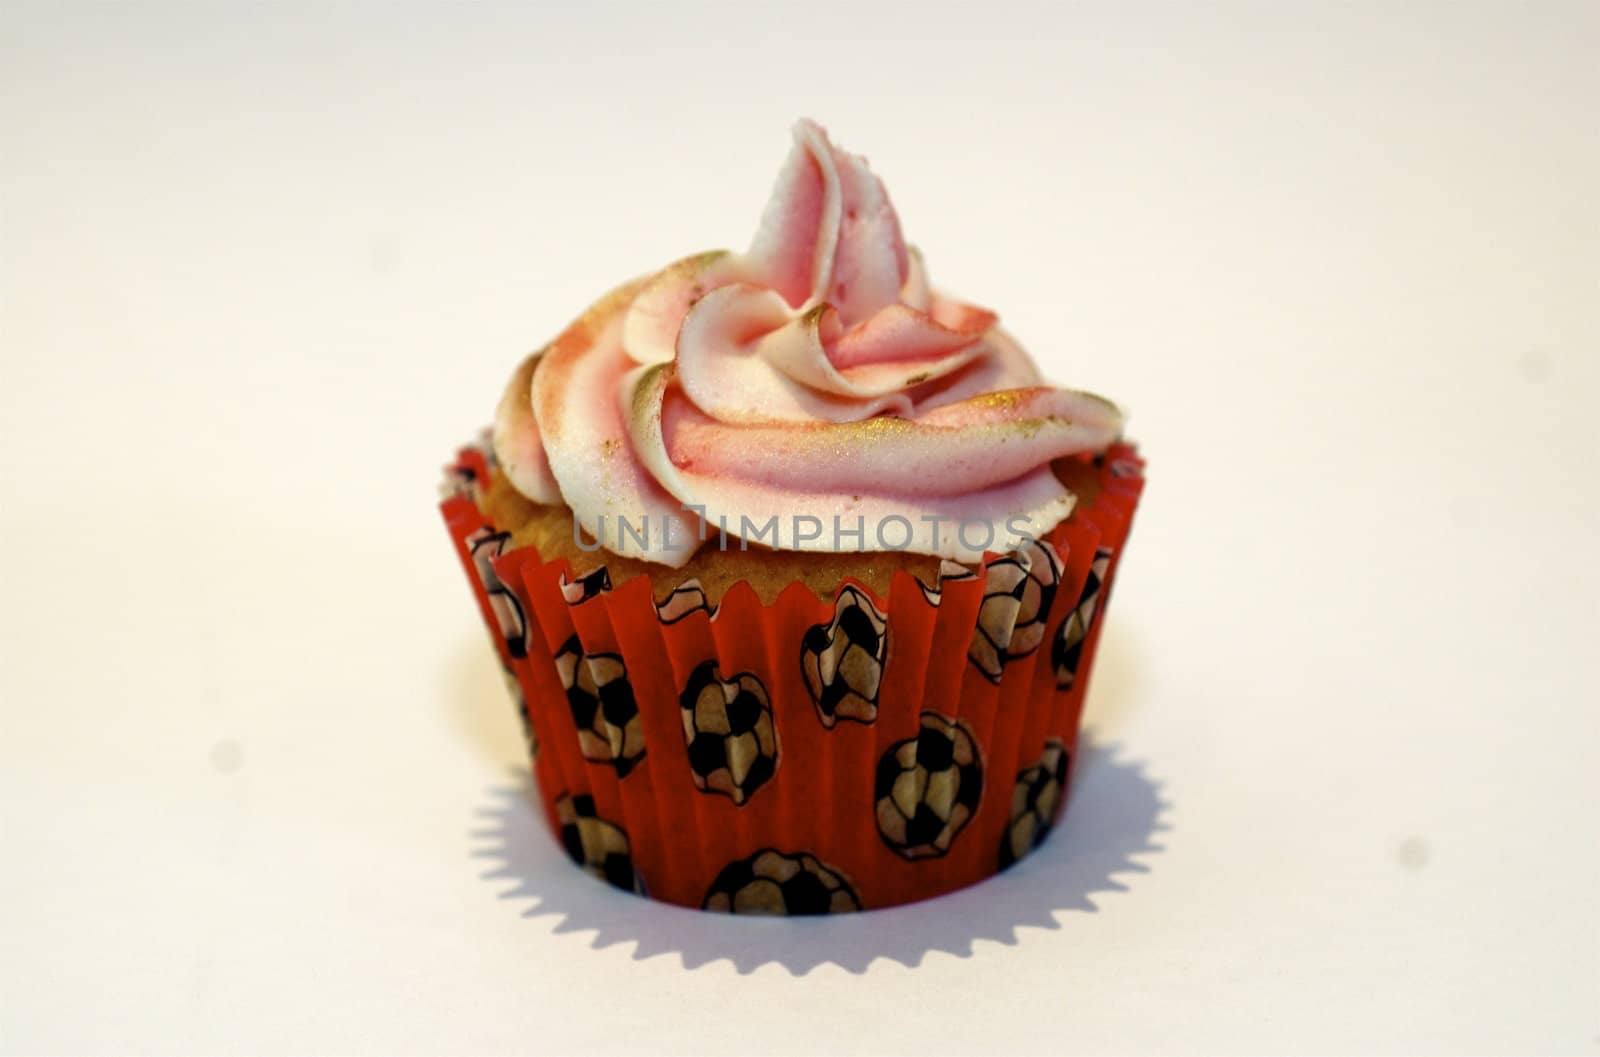 A cupcake with pink frosting on the stop, in a red case decorated with tiny footballs, against a white background with copy space.